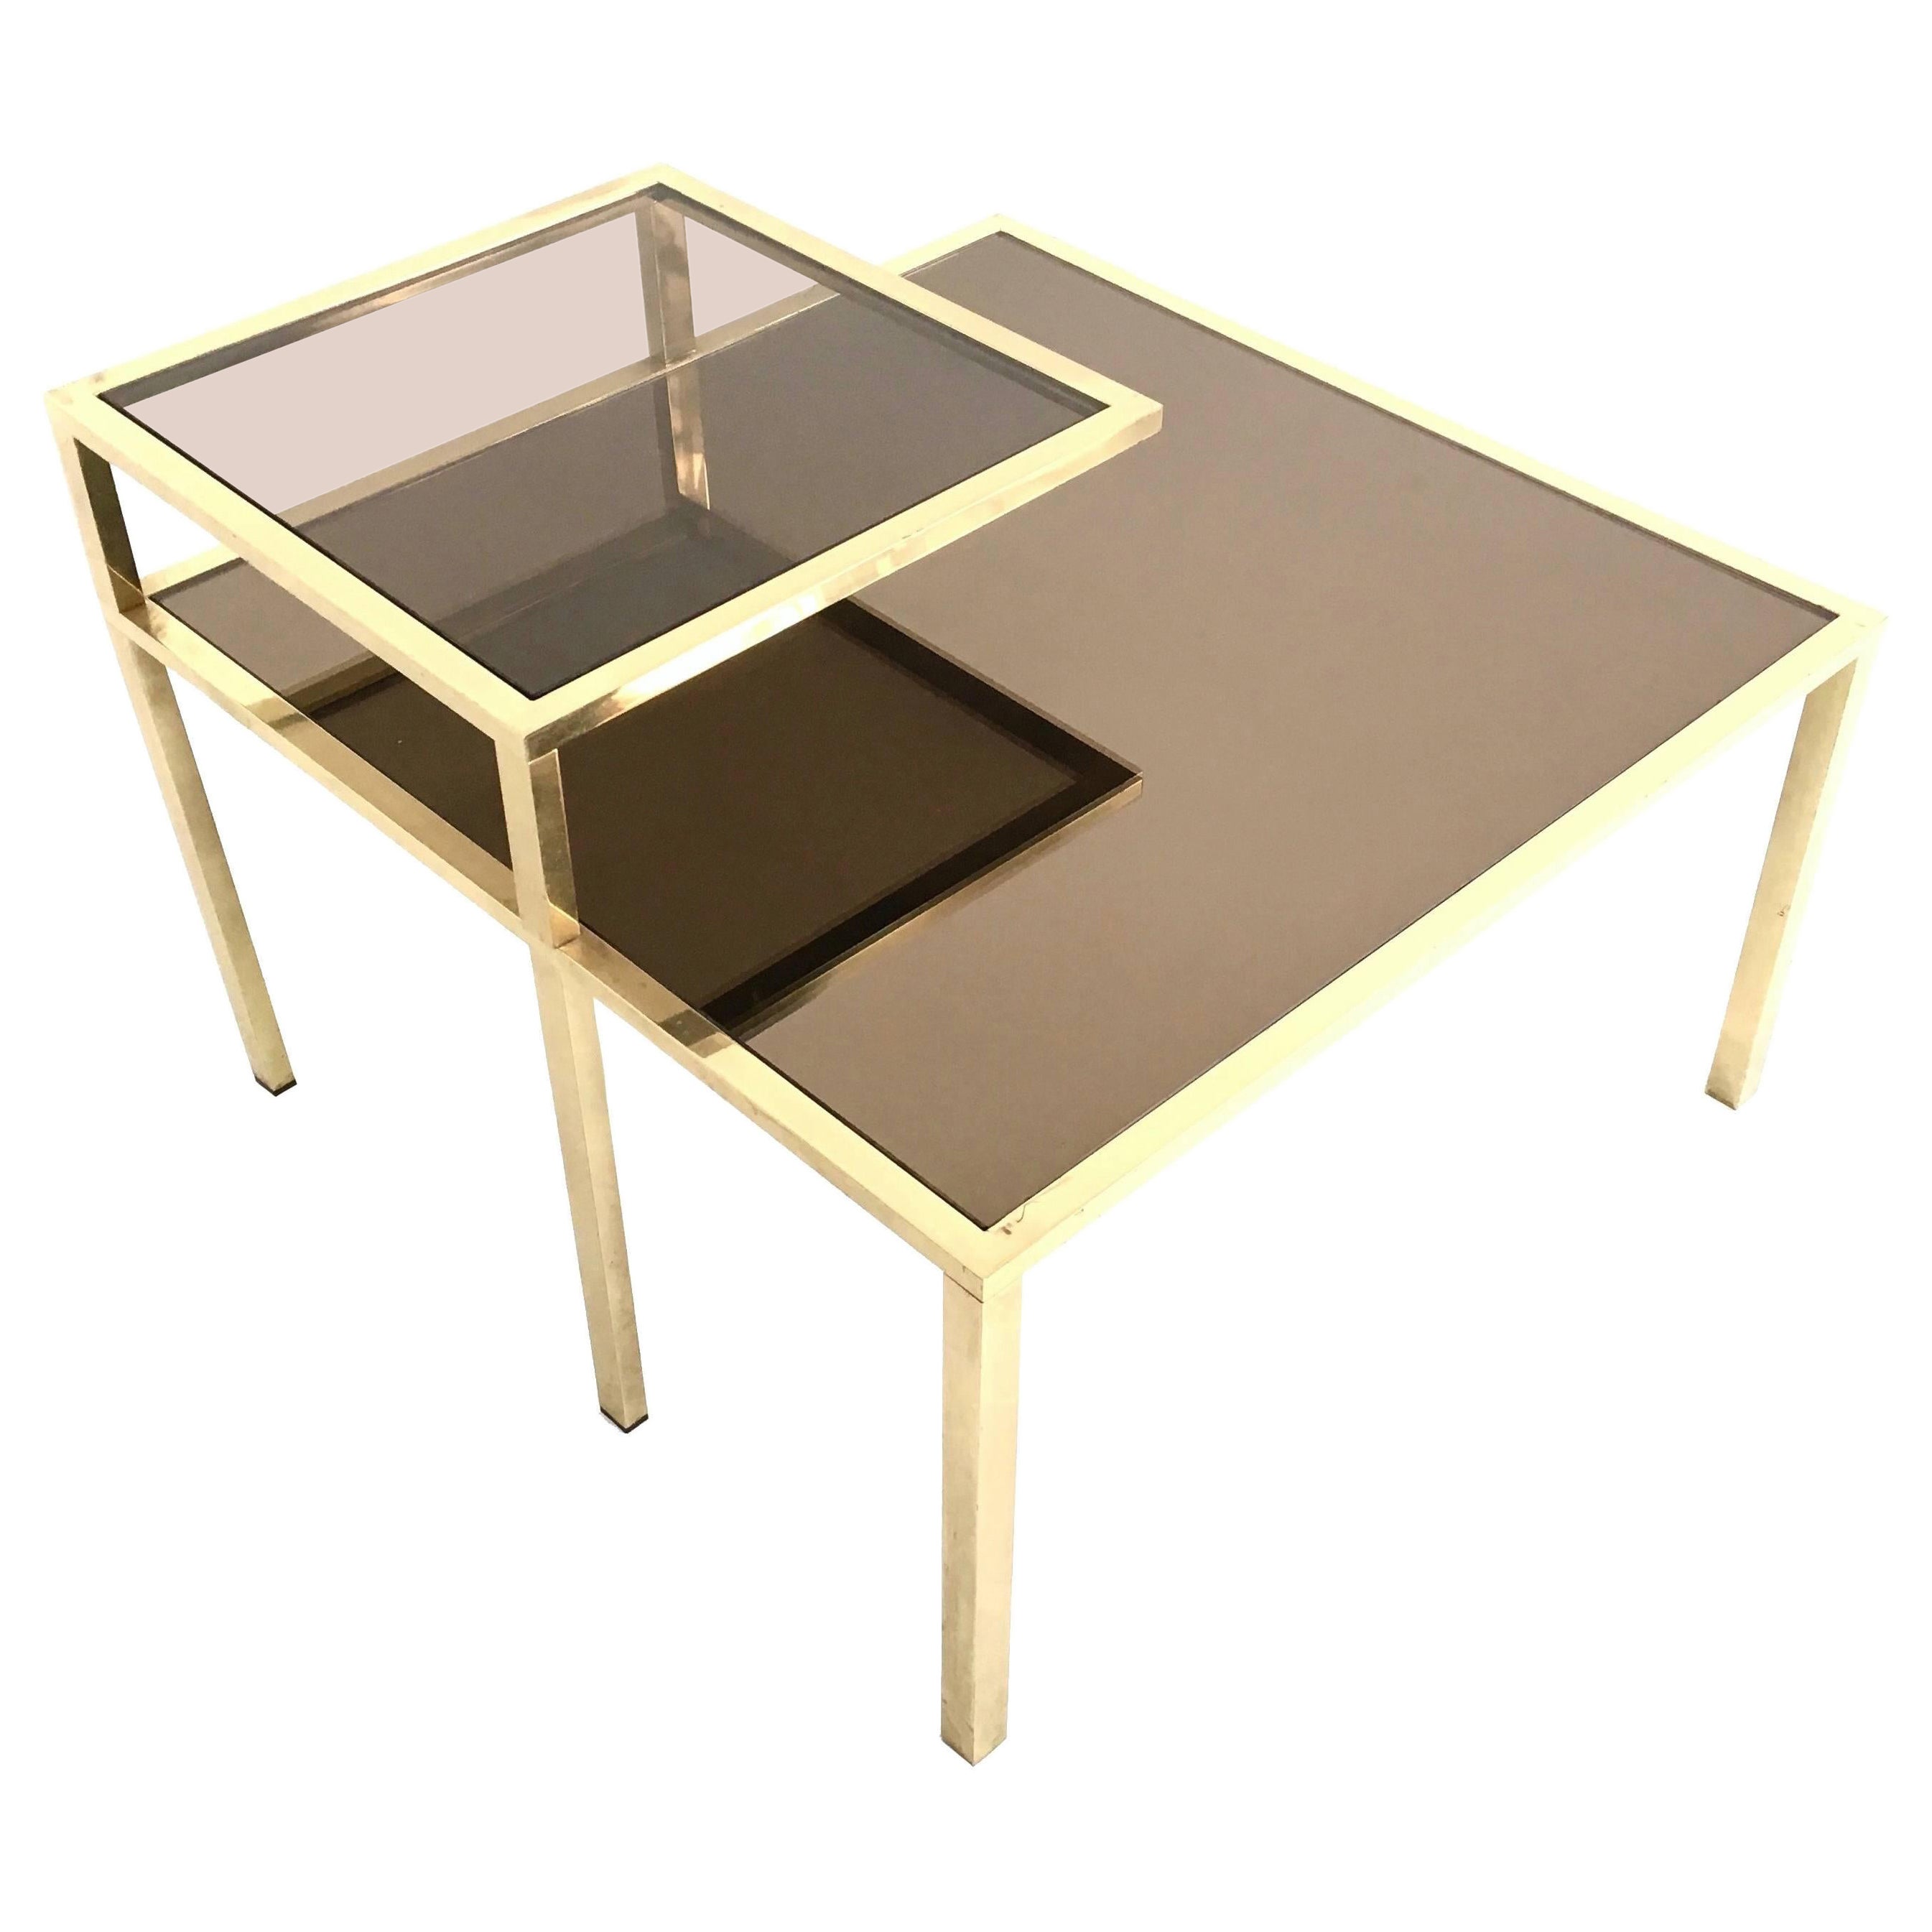 Made in Italy, 1980s.
Ascribable to Romeo Rega.
This coffee table features a brass frame, a glass shelf and a mirrored top.
It may show slight traces of use since it's vintage, but it can be considered as in very good original condition and ready to